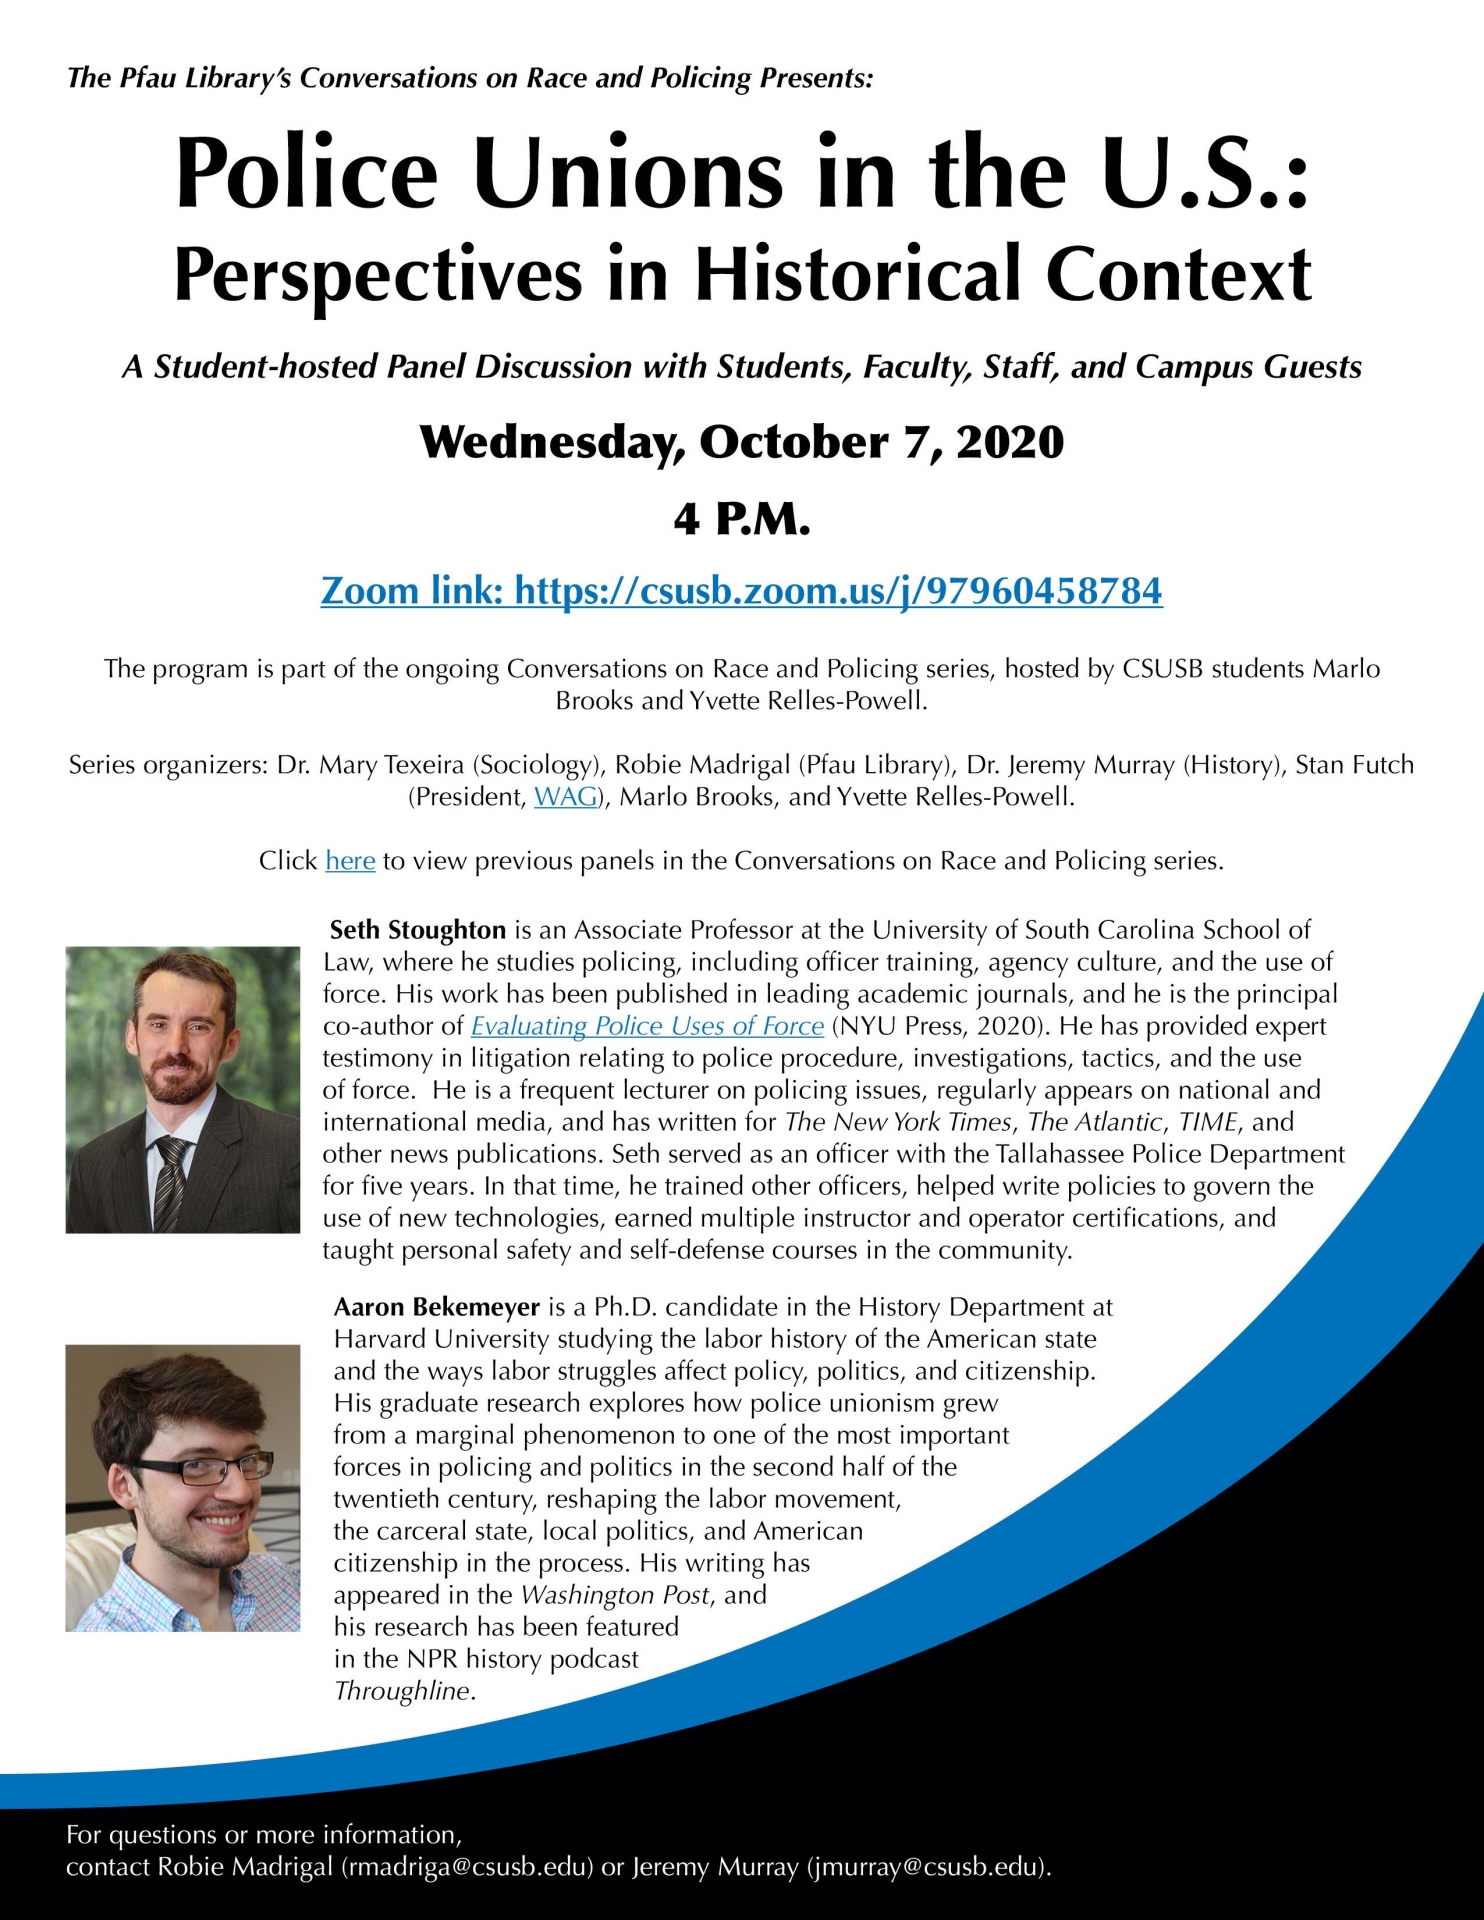 Police Unions in the U.S.: Perspectives in Historical Context, Wednesday Oct 7, 2020